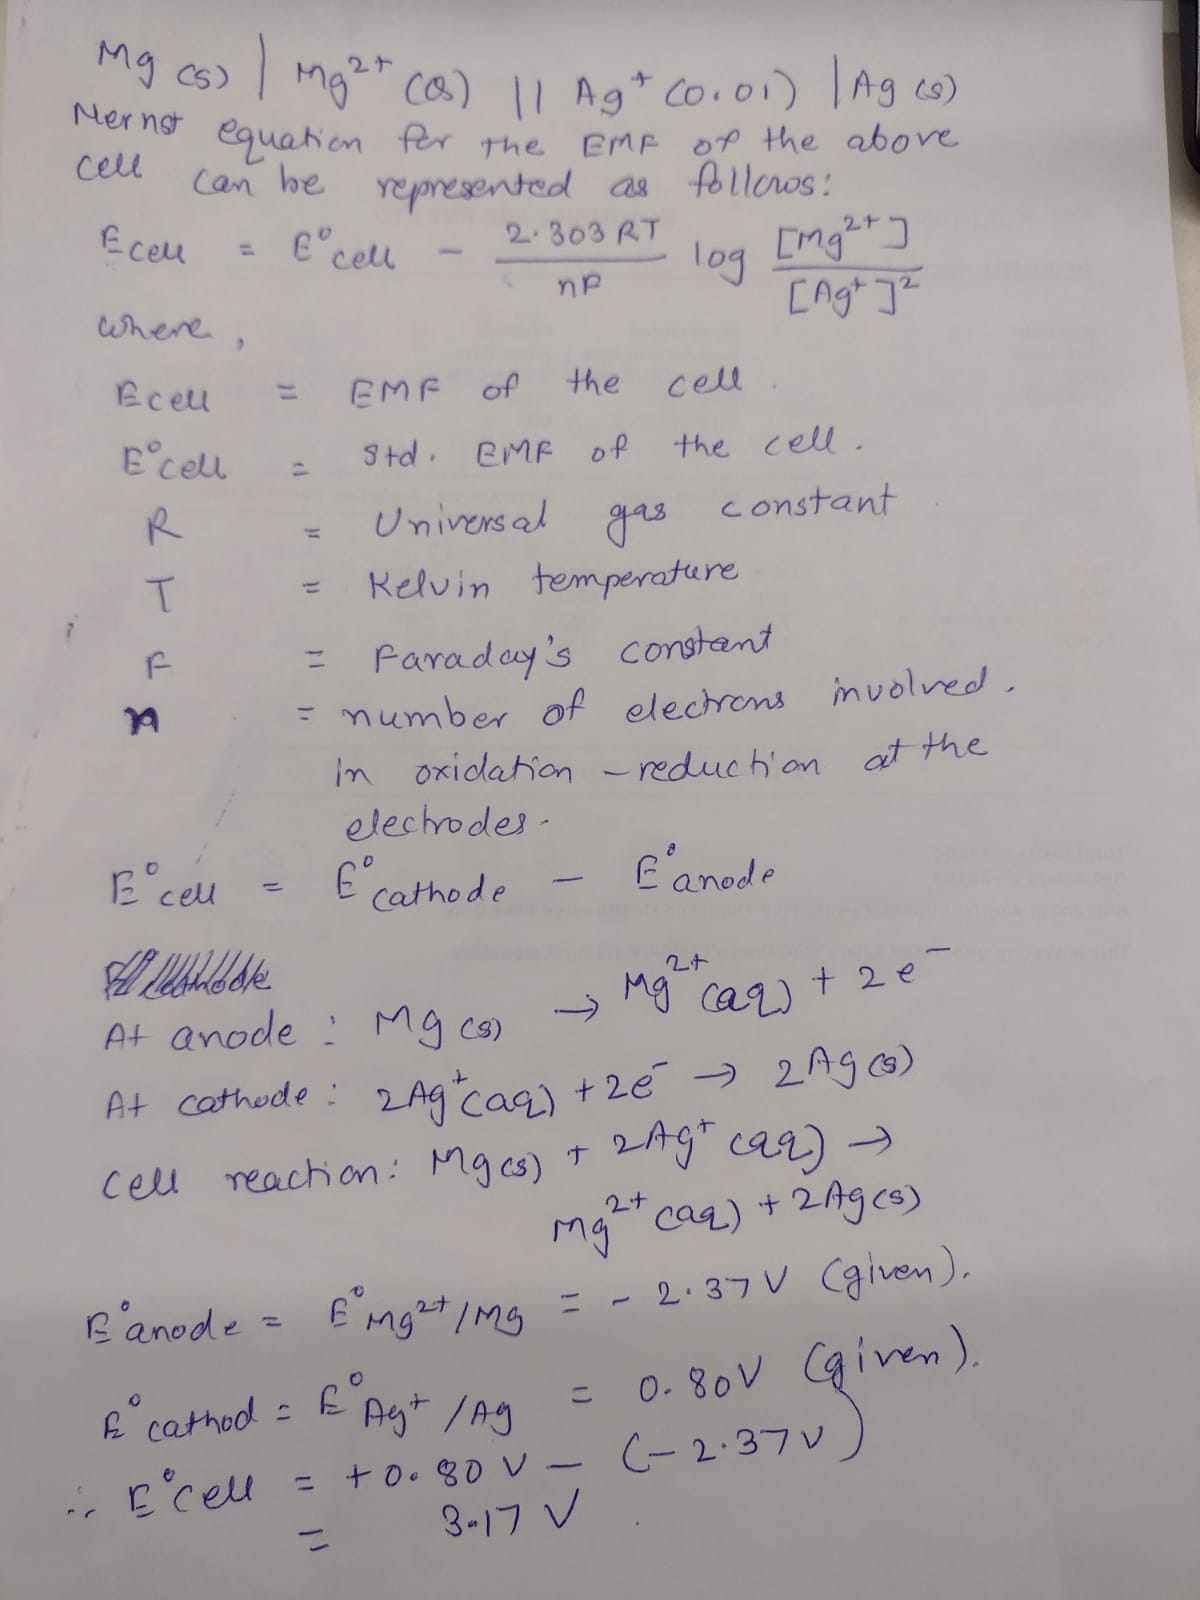 Nernst equation, Strength of Mg2+ ions part 1